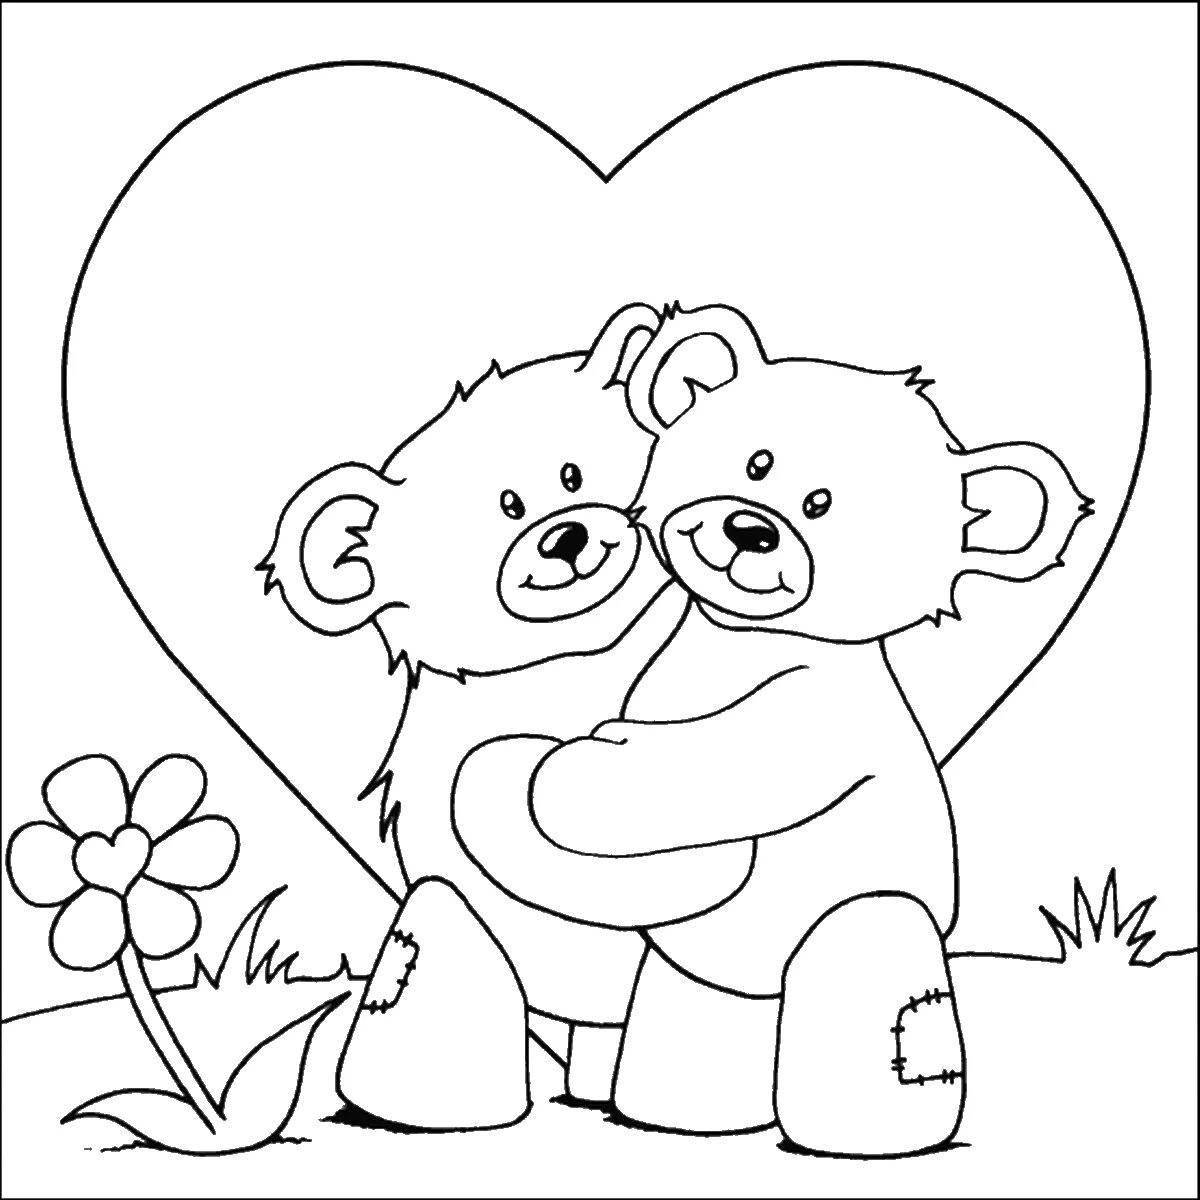 Exciting hug day coloring for kids